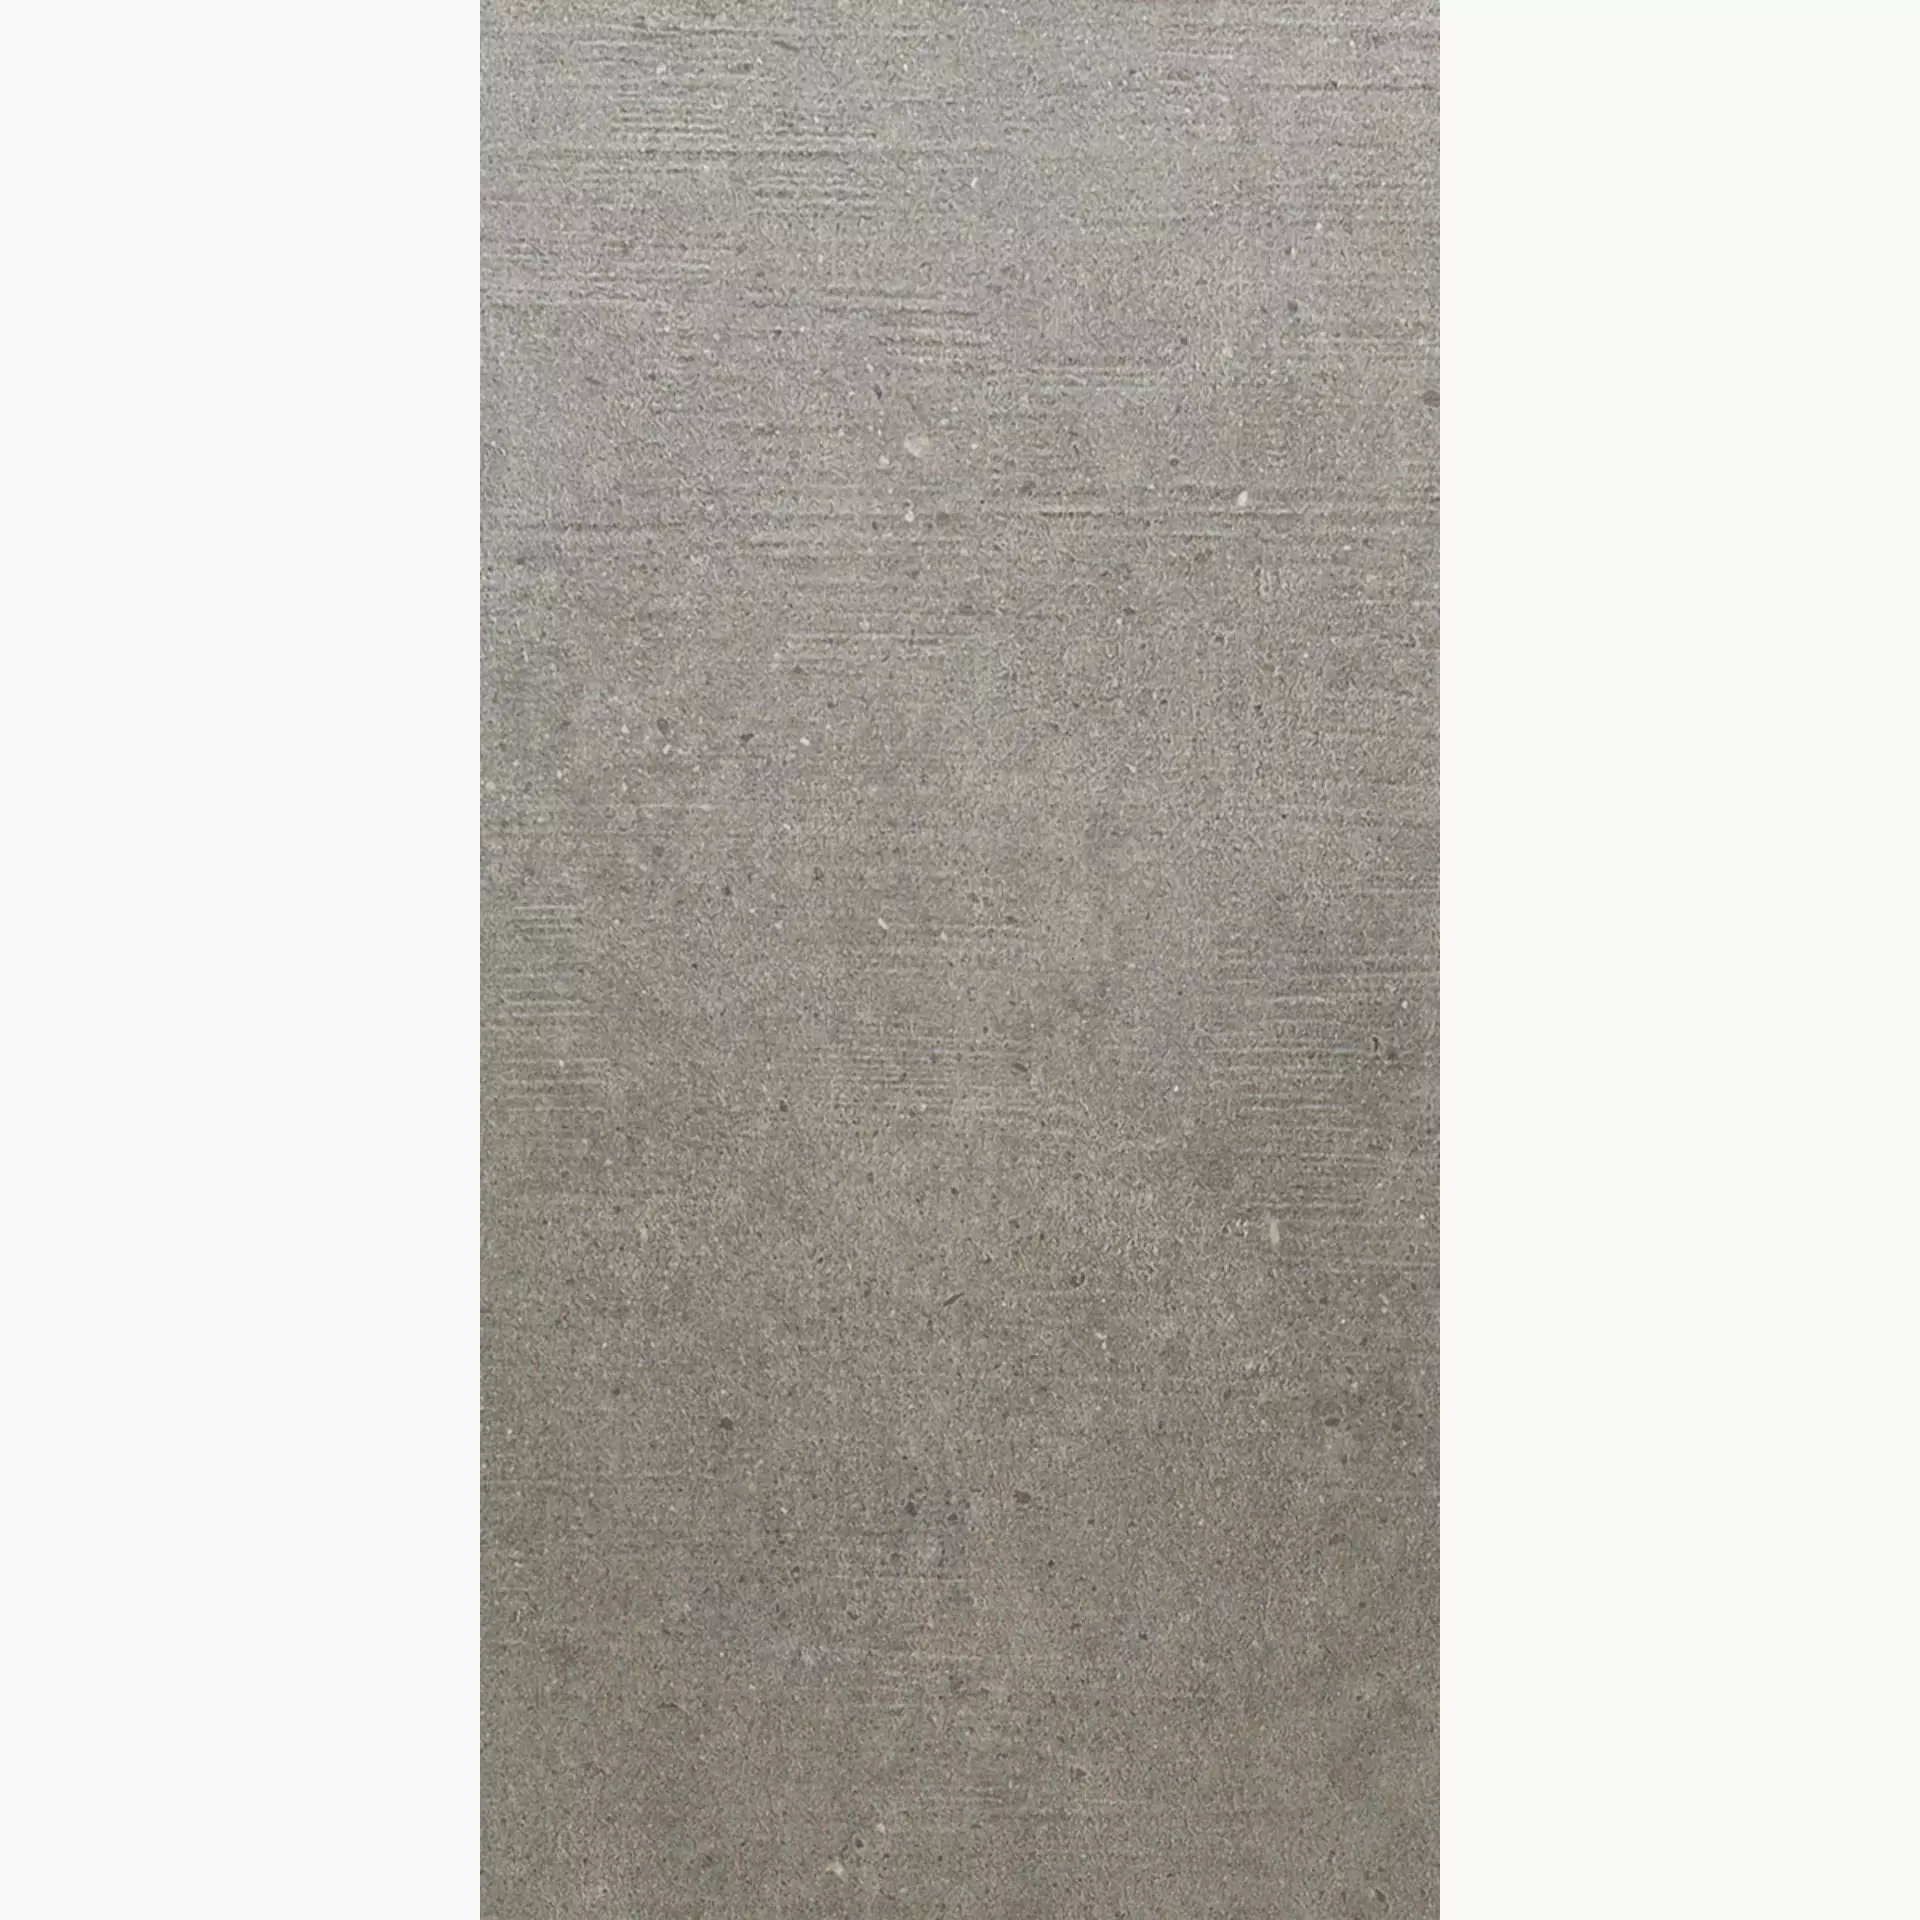 Rondine Loft Taupe Strong J89117 40x80cm rectified 8,5mm